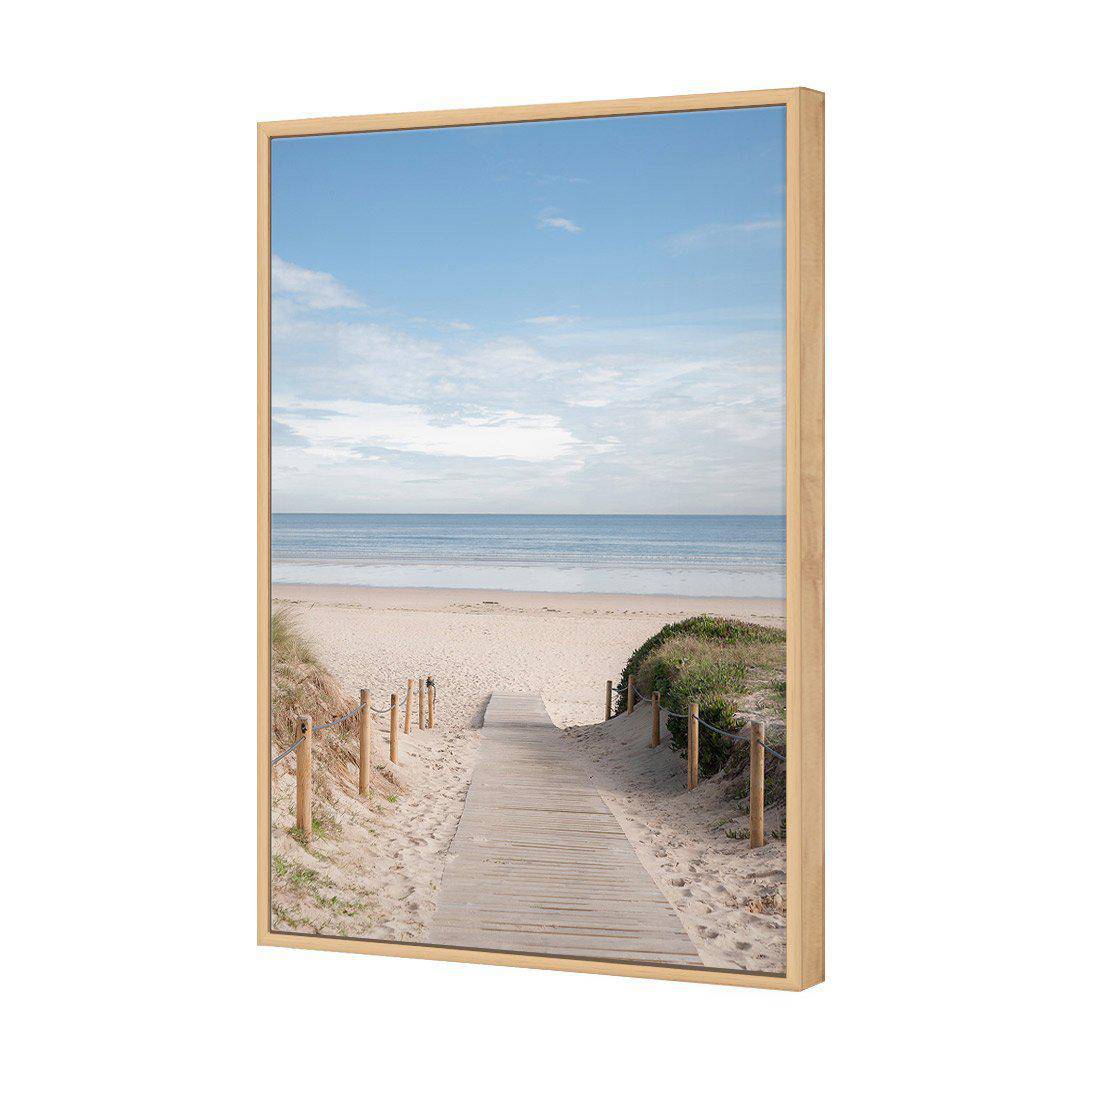 Pathway To The Sea Canvas Art-Canvas-Wall Art Designs-45x30cm-Canvas - Oak Frame-Wall Art Designs